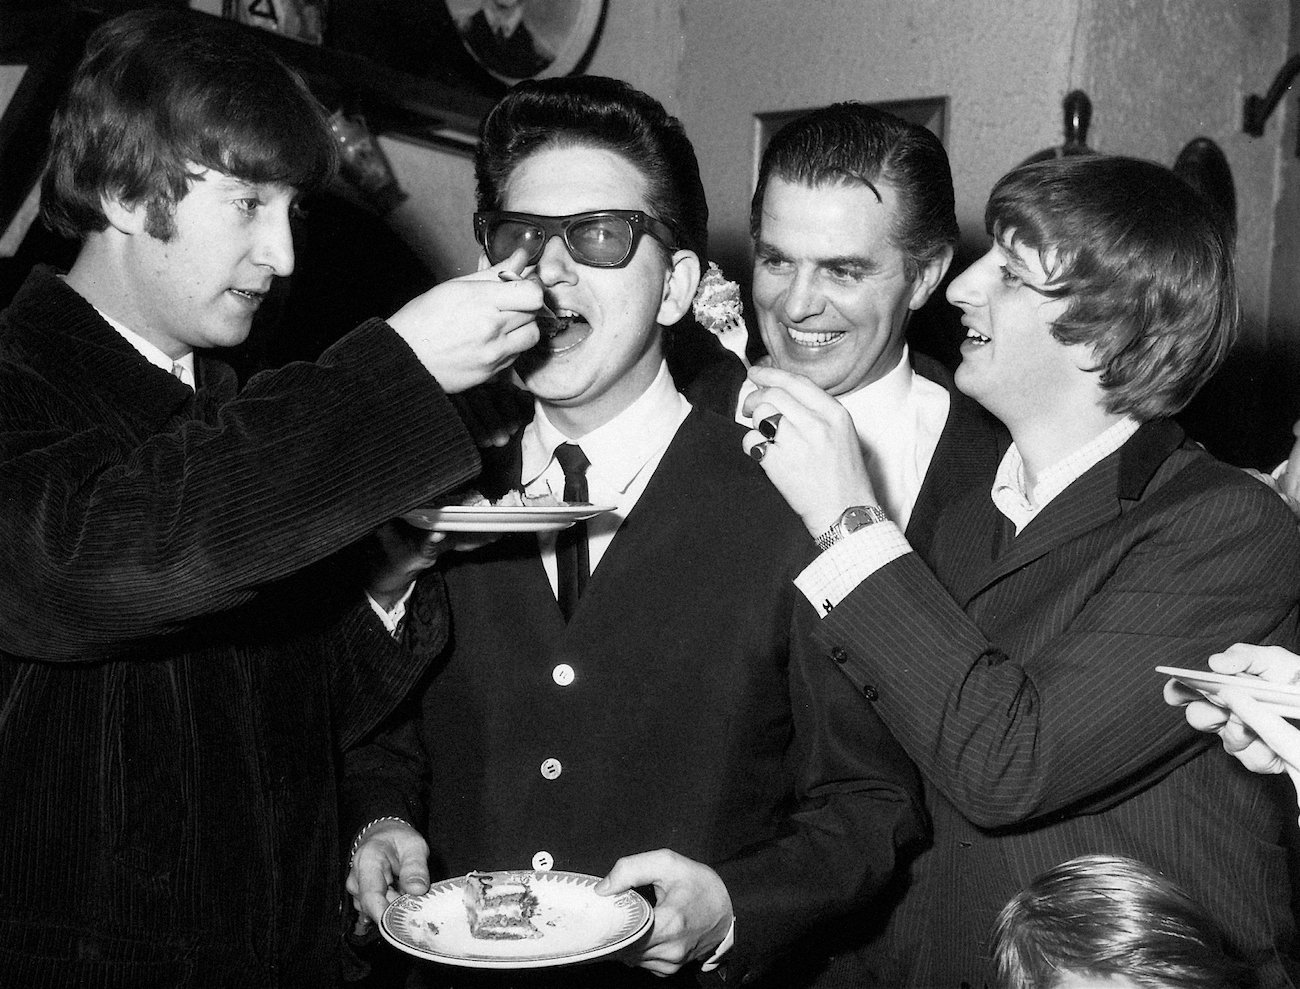 The Beatles feeding cake to Roy Orbison on his 28th birthday in 1964.